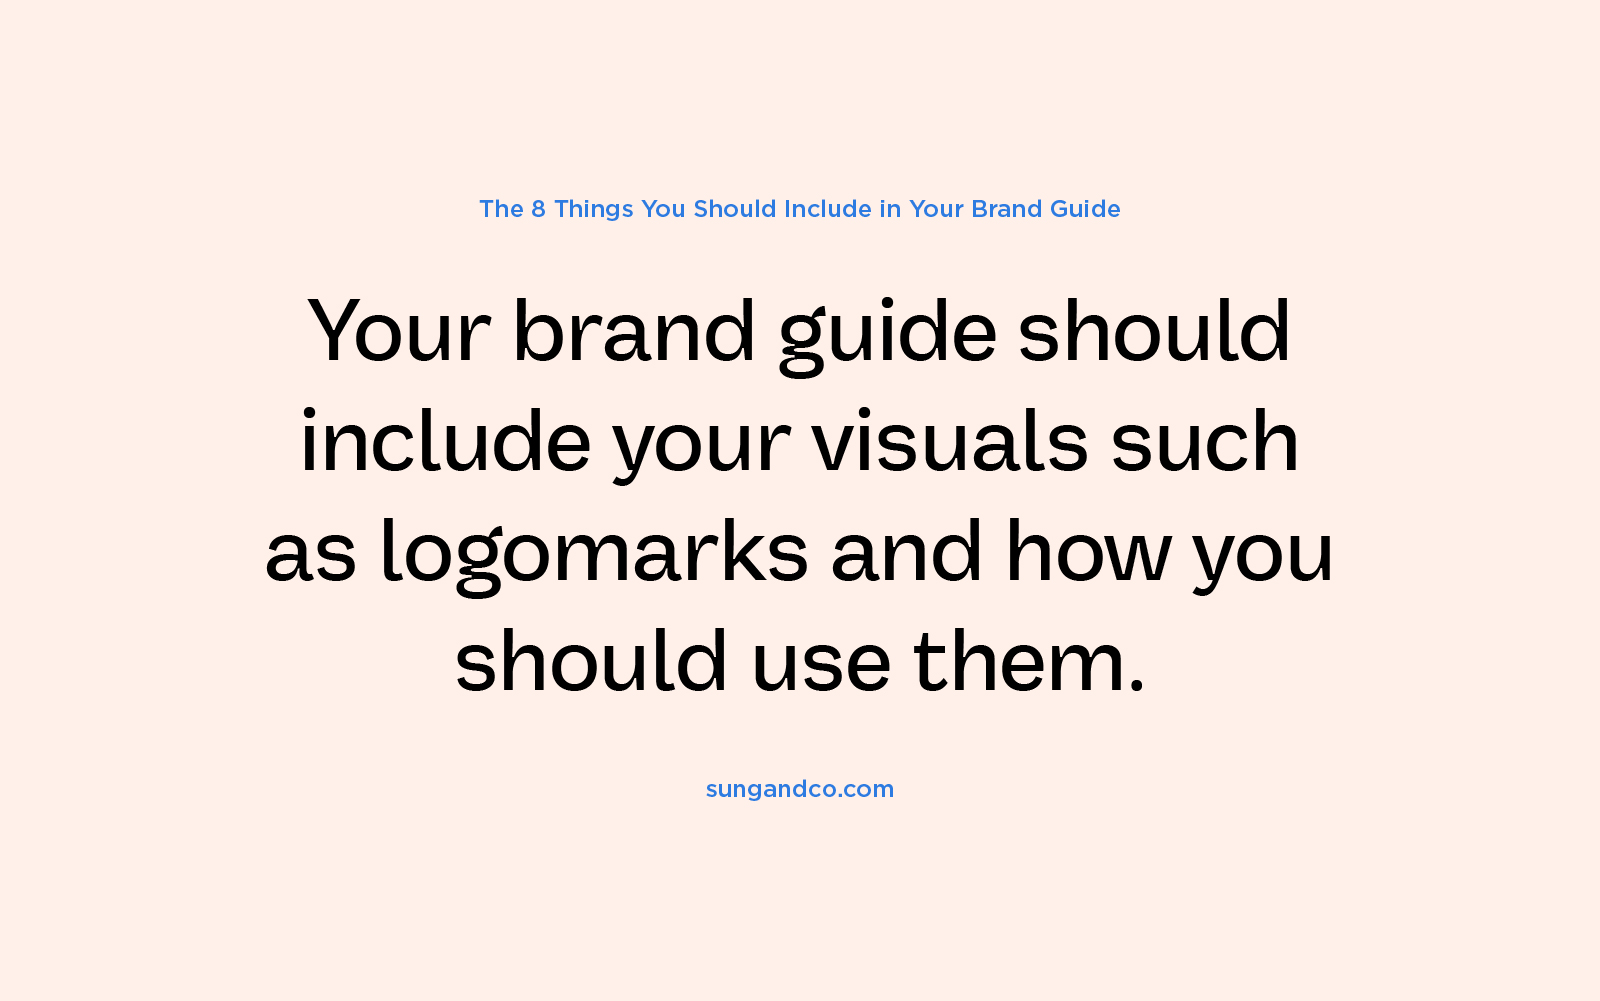 Your brand guide should include your visuals such as logomarks and how you use them.